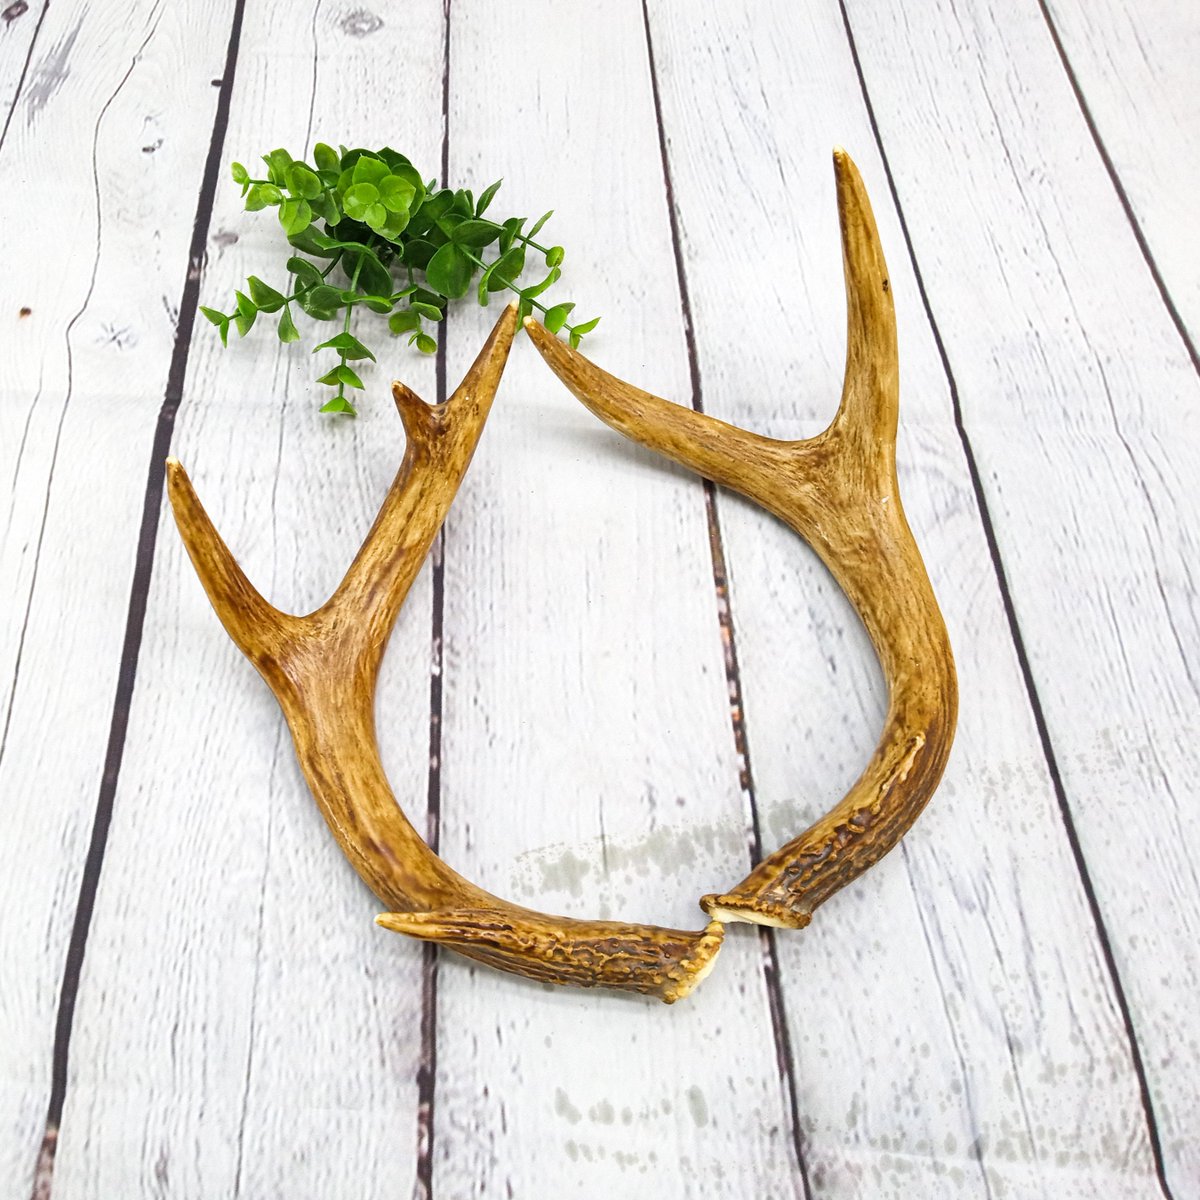 Excited to share the latest addition to my #etsy shop: real deer antlers | urban viking room decor etsy.me/3OiNJpX #white #realdeerantlers #deerantler #deerantlers #urbanantler #vikingantler #urbandecor #vikingdecor #urbandeerdecor #cottagecore #aesthetic